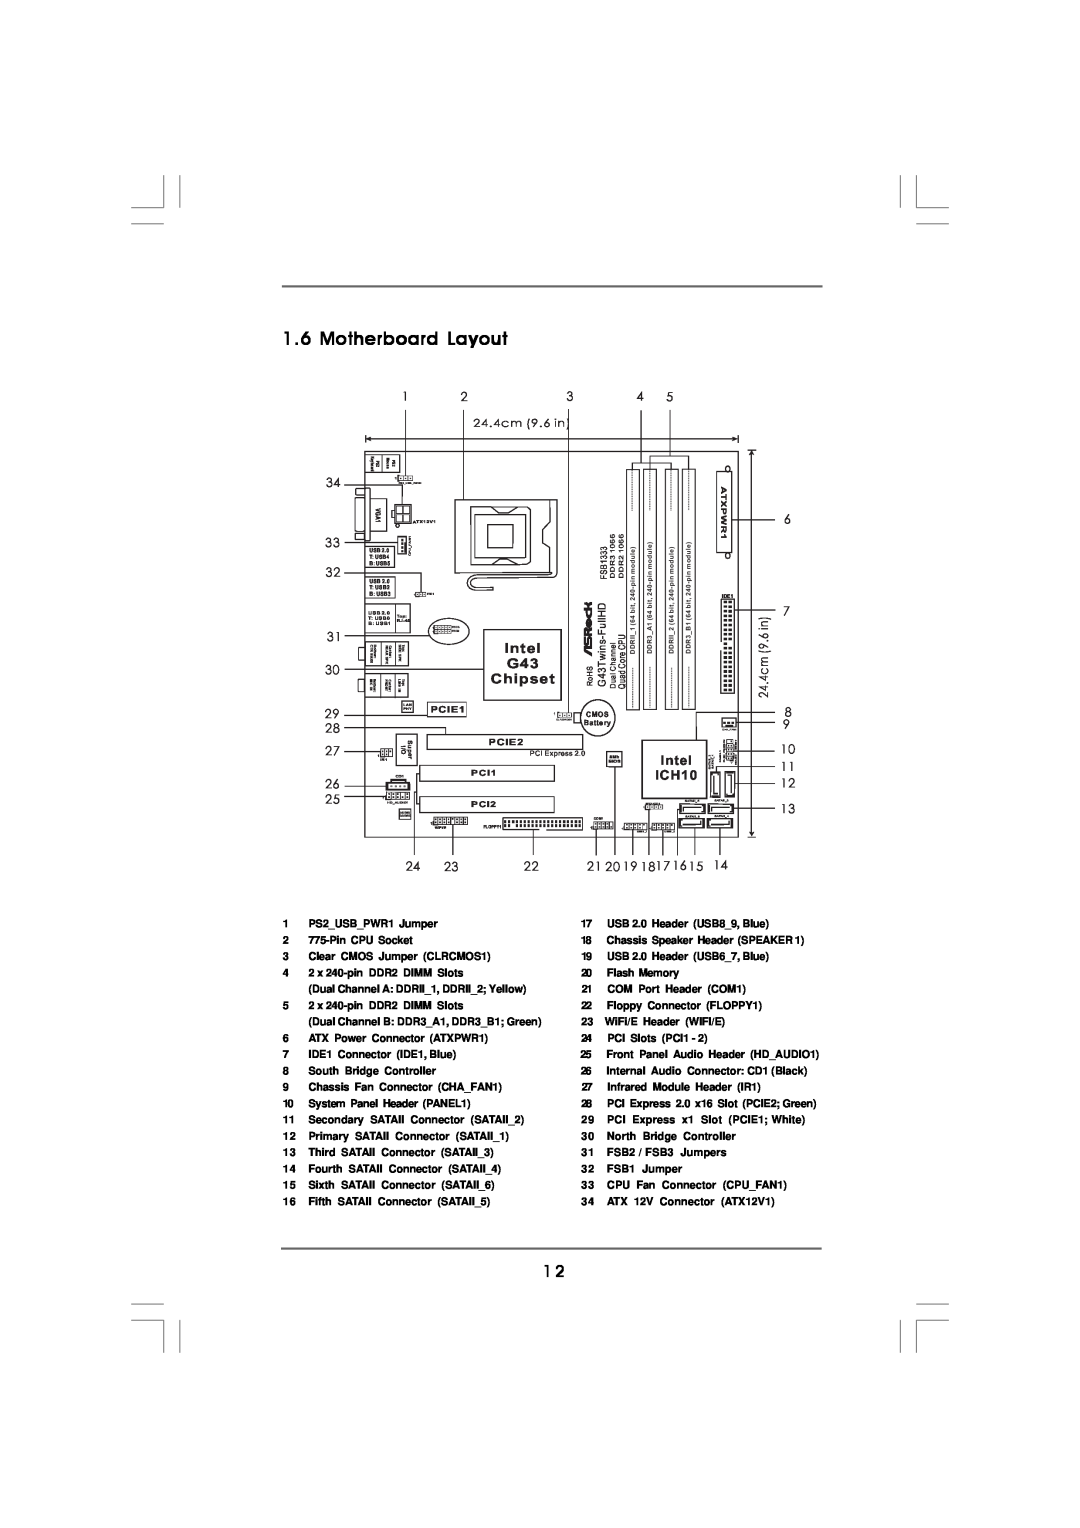 Magnavox G43TWINS-FULLHD user manual Motherboard Layout, Intel, Chipset, ICH10, 21 20 19 1817 16, 24.4cm 9.6 in, ATXPWR1 